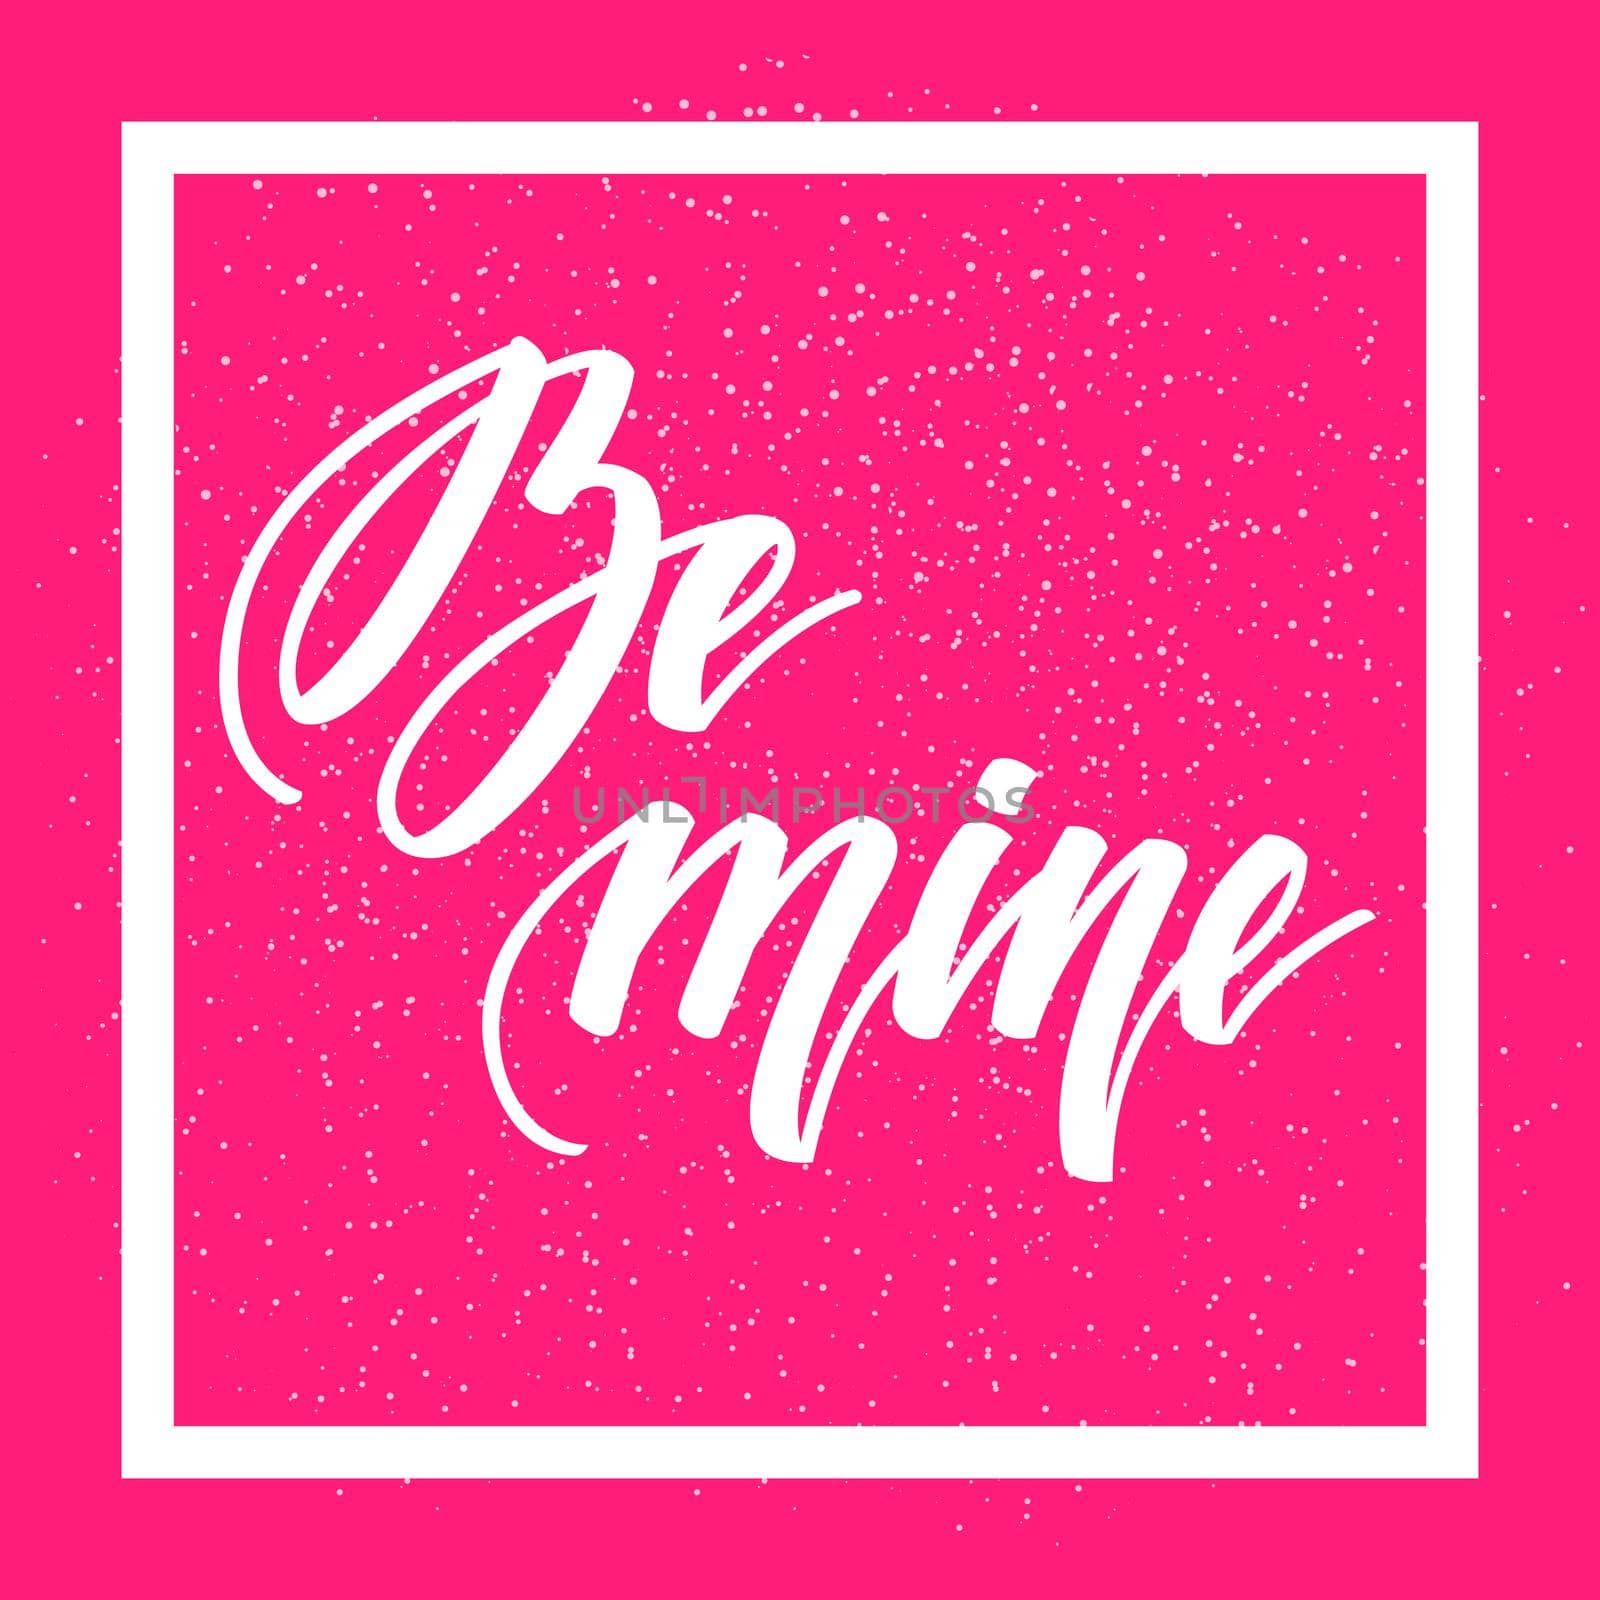 Be mine. Romantic lettering on pink background. illustration for Valentines day greeting cards, posters and much more by Marin4ik